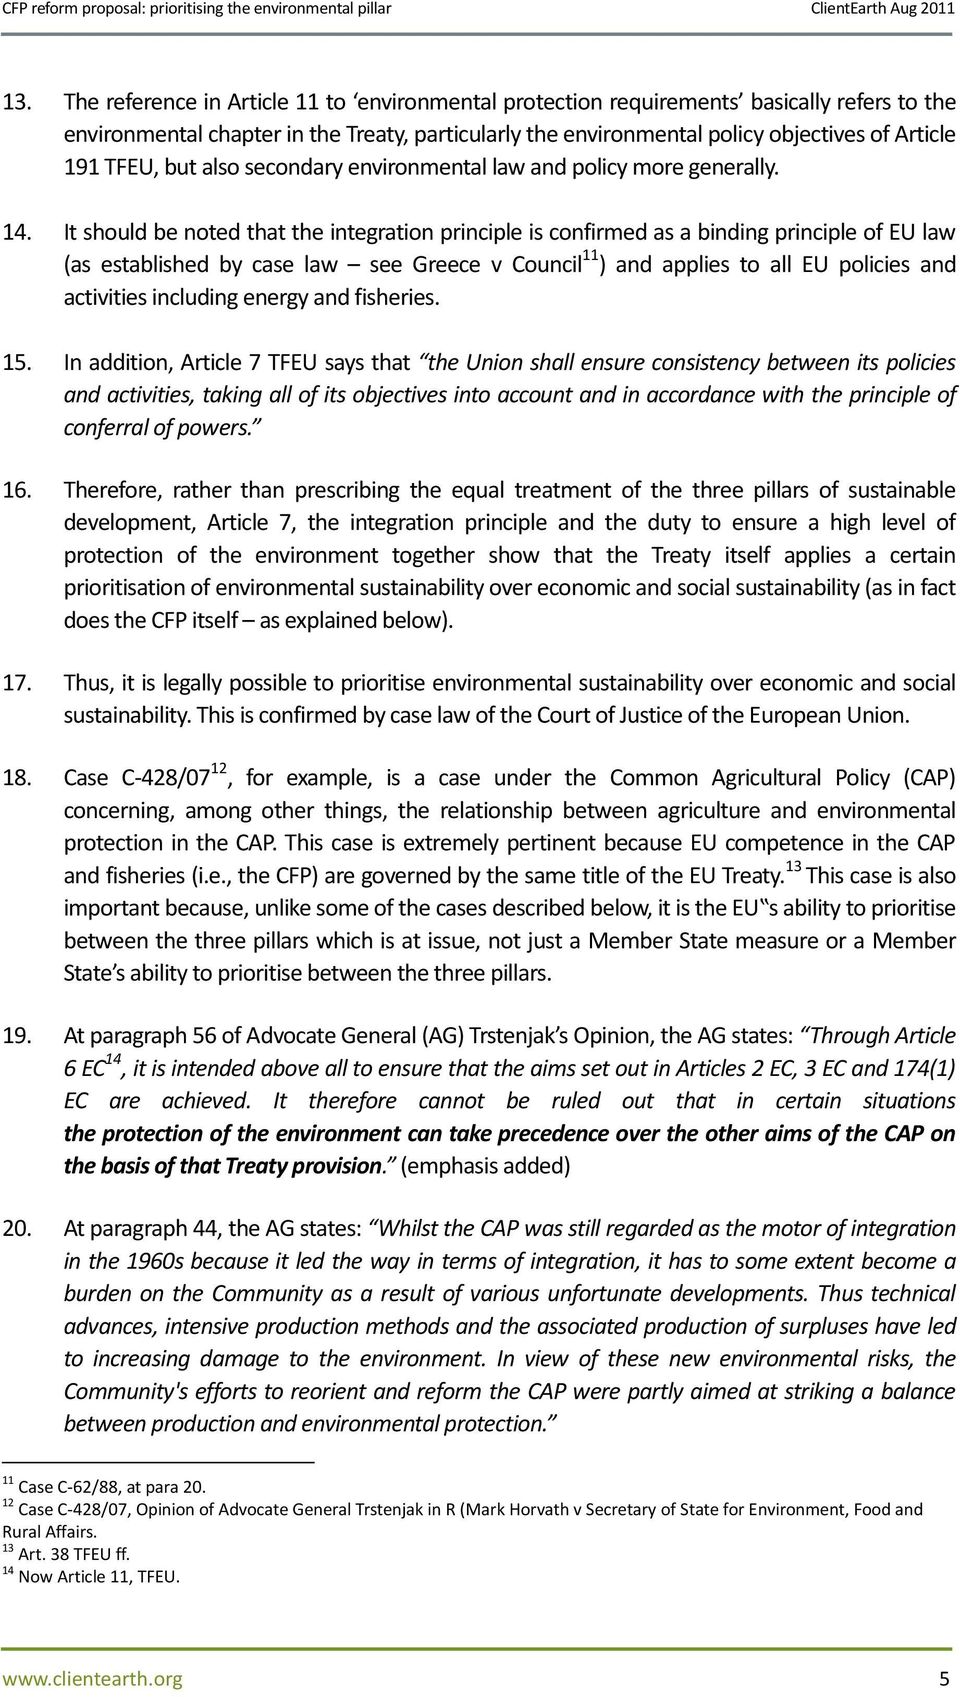 It should be noted that the integration principle is confirmed as a binding principle of EU law (as established by case law see Greece v Council 11 ) and applies to all EU policies and activities